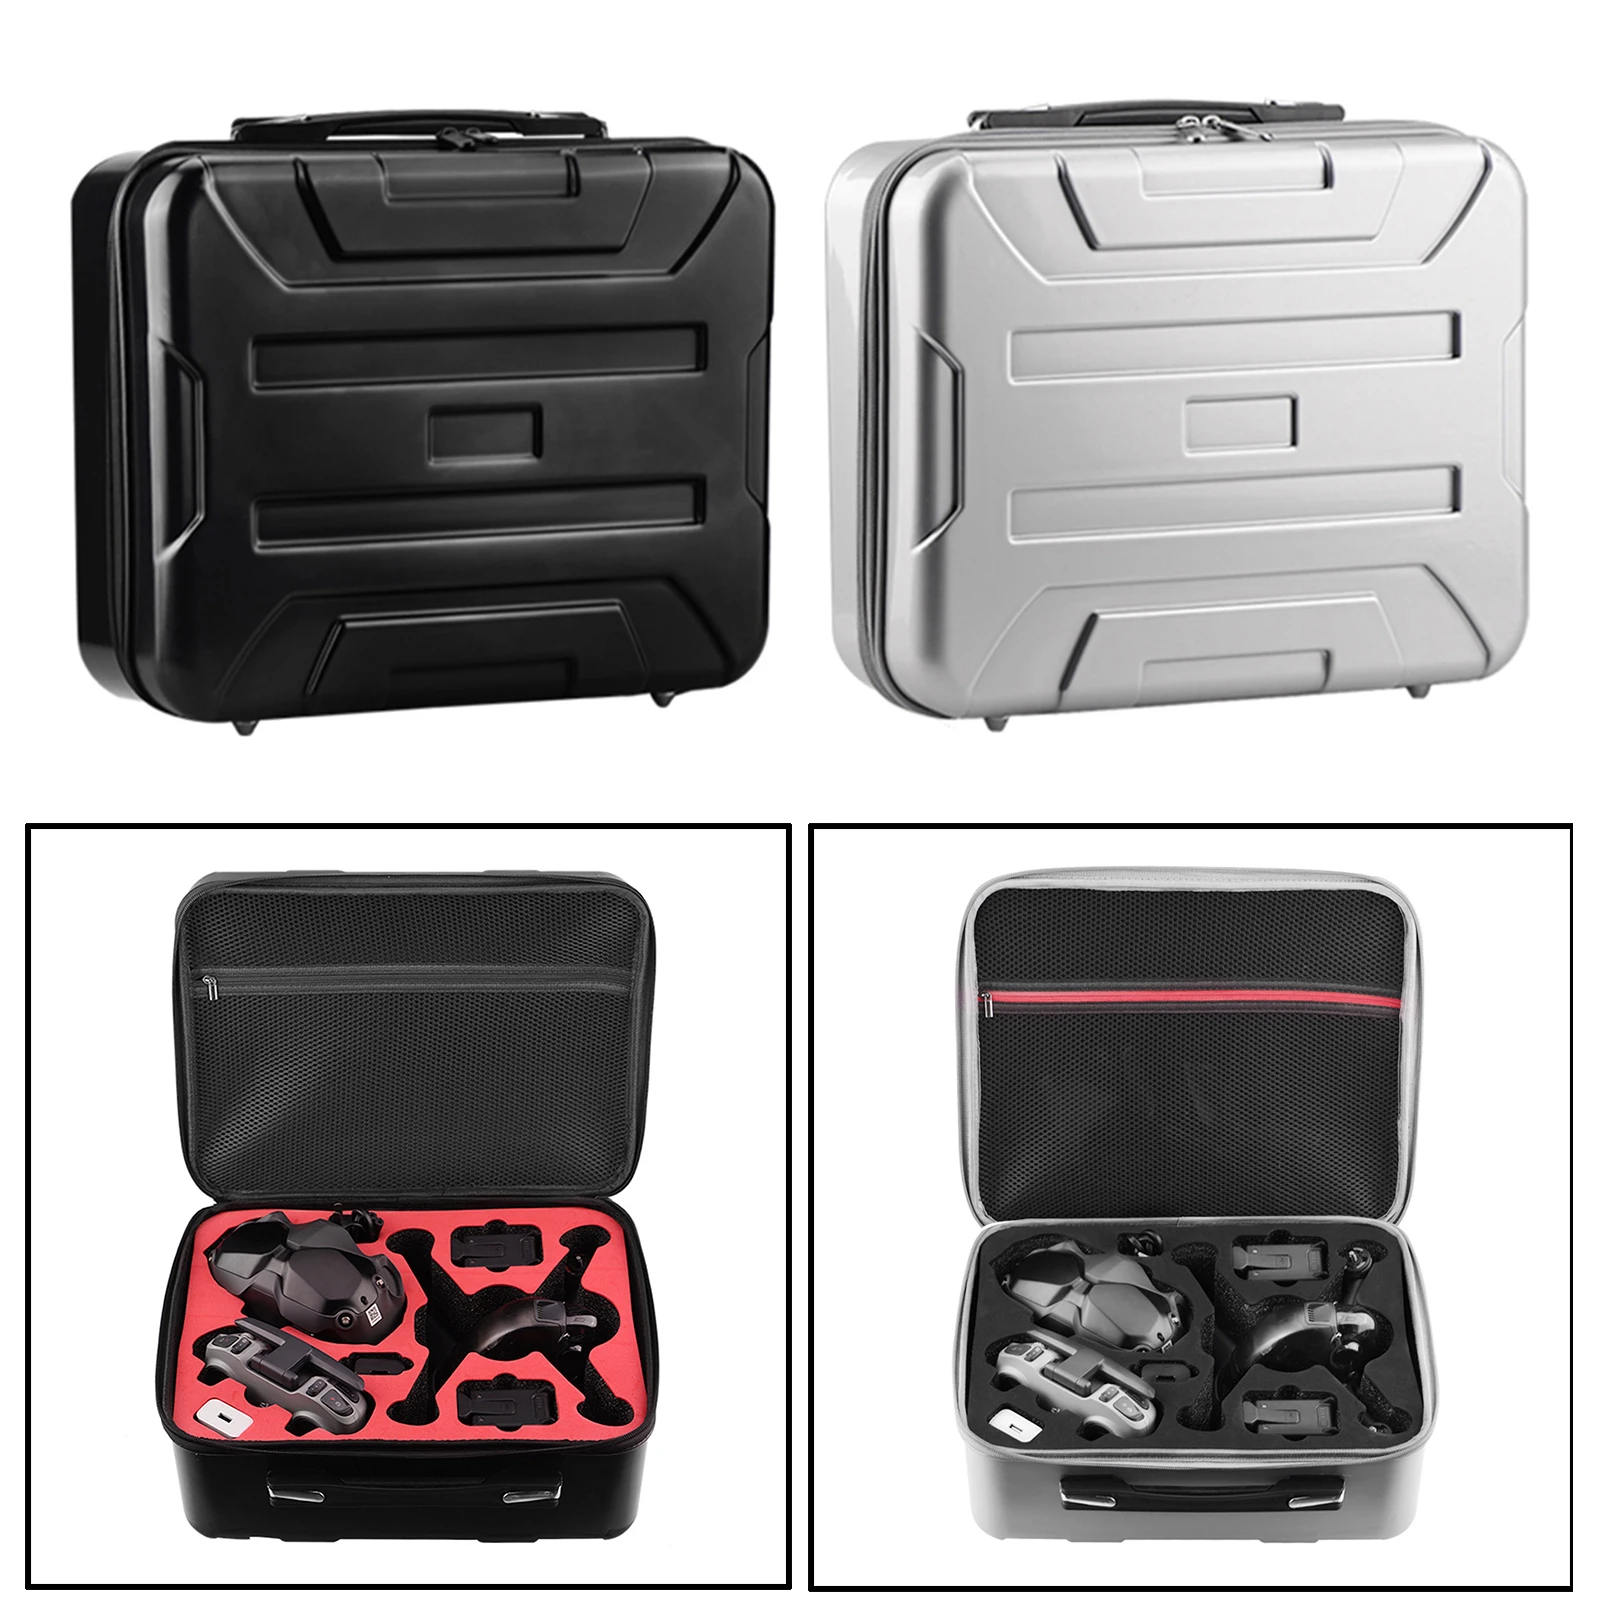 Professional Carrying Case Bag Waterproof Hard Shell For DJI FPV Combo Quadcopter Remote Controller 14.17 x 11.02 x 6.29 inches